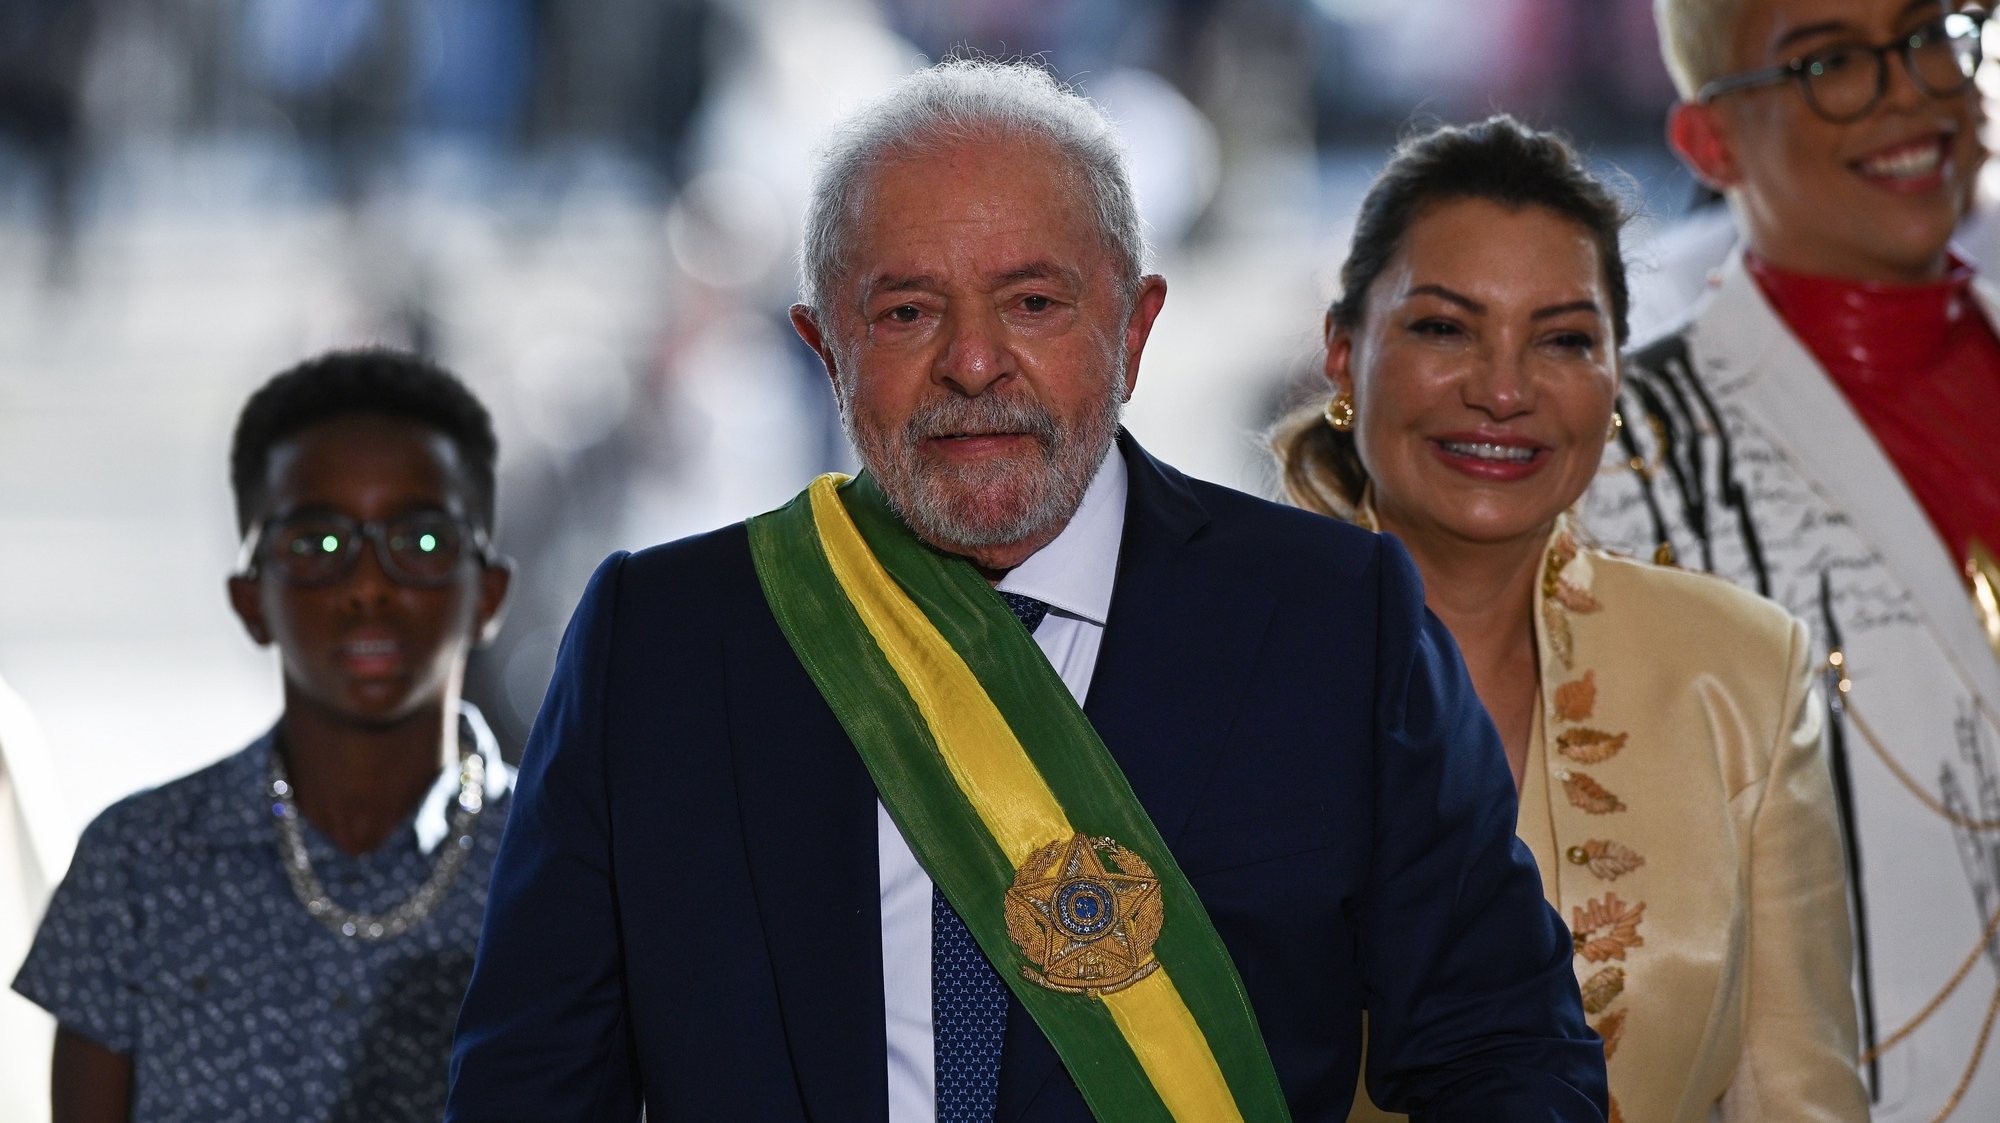 epa10385778 Brazil&#039;s President Luiz Inacio Lula da Silva (C) and First Lady Rosangela da Silva (2-R) react following Lula&#039;s inauguration ceremony in Brasilia, Brazil, 01 January 2023. Lula was sworn in for his third term as President of Brazil after winning the October 2022 general elections.  EPA/Andre Borges